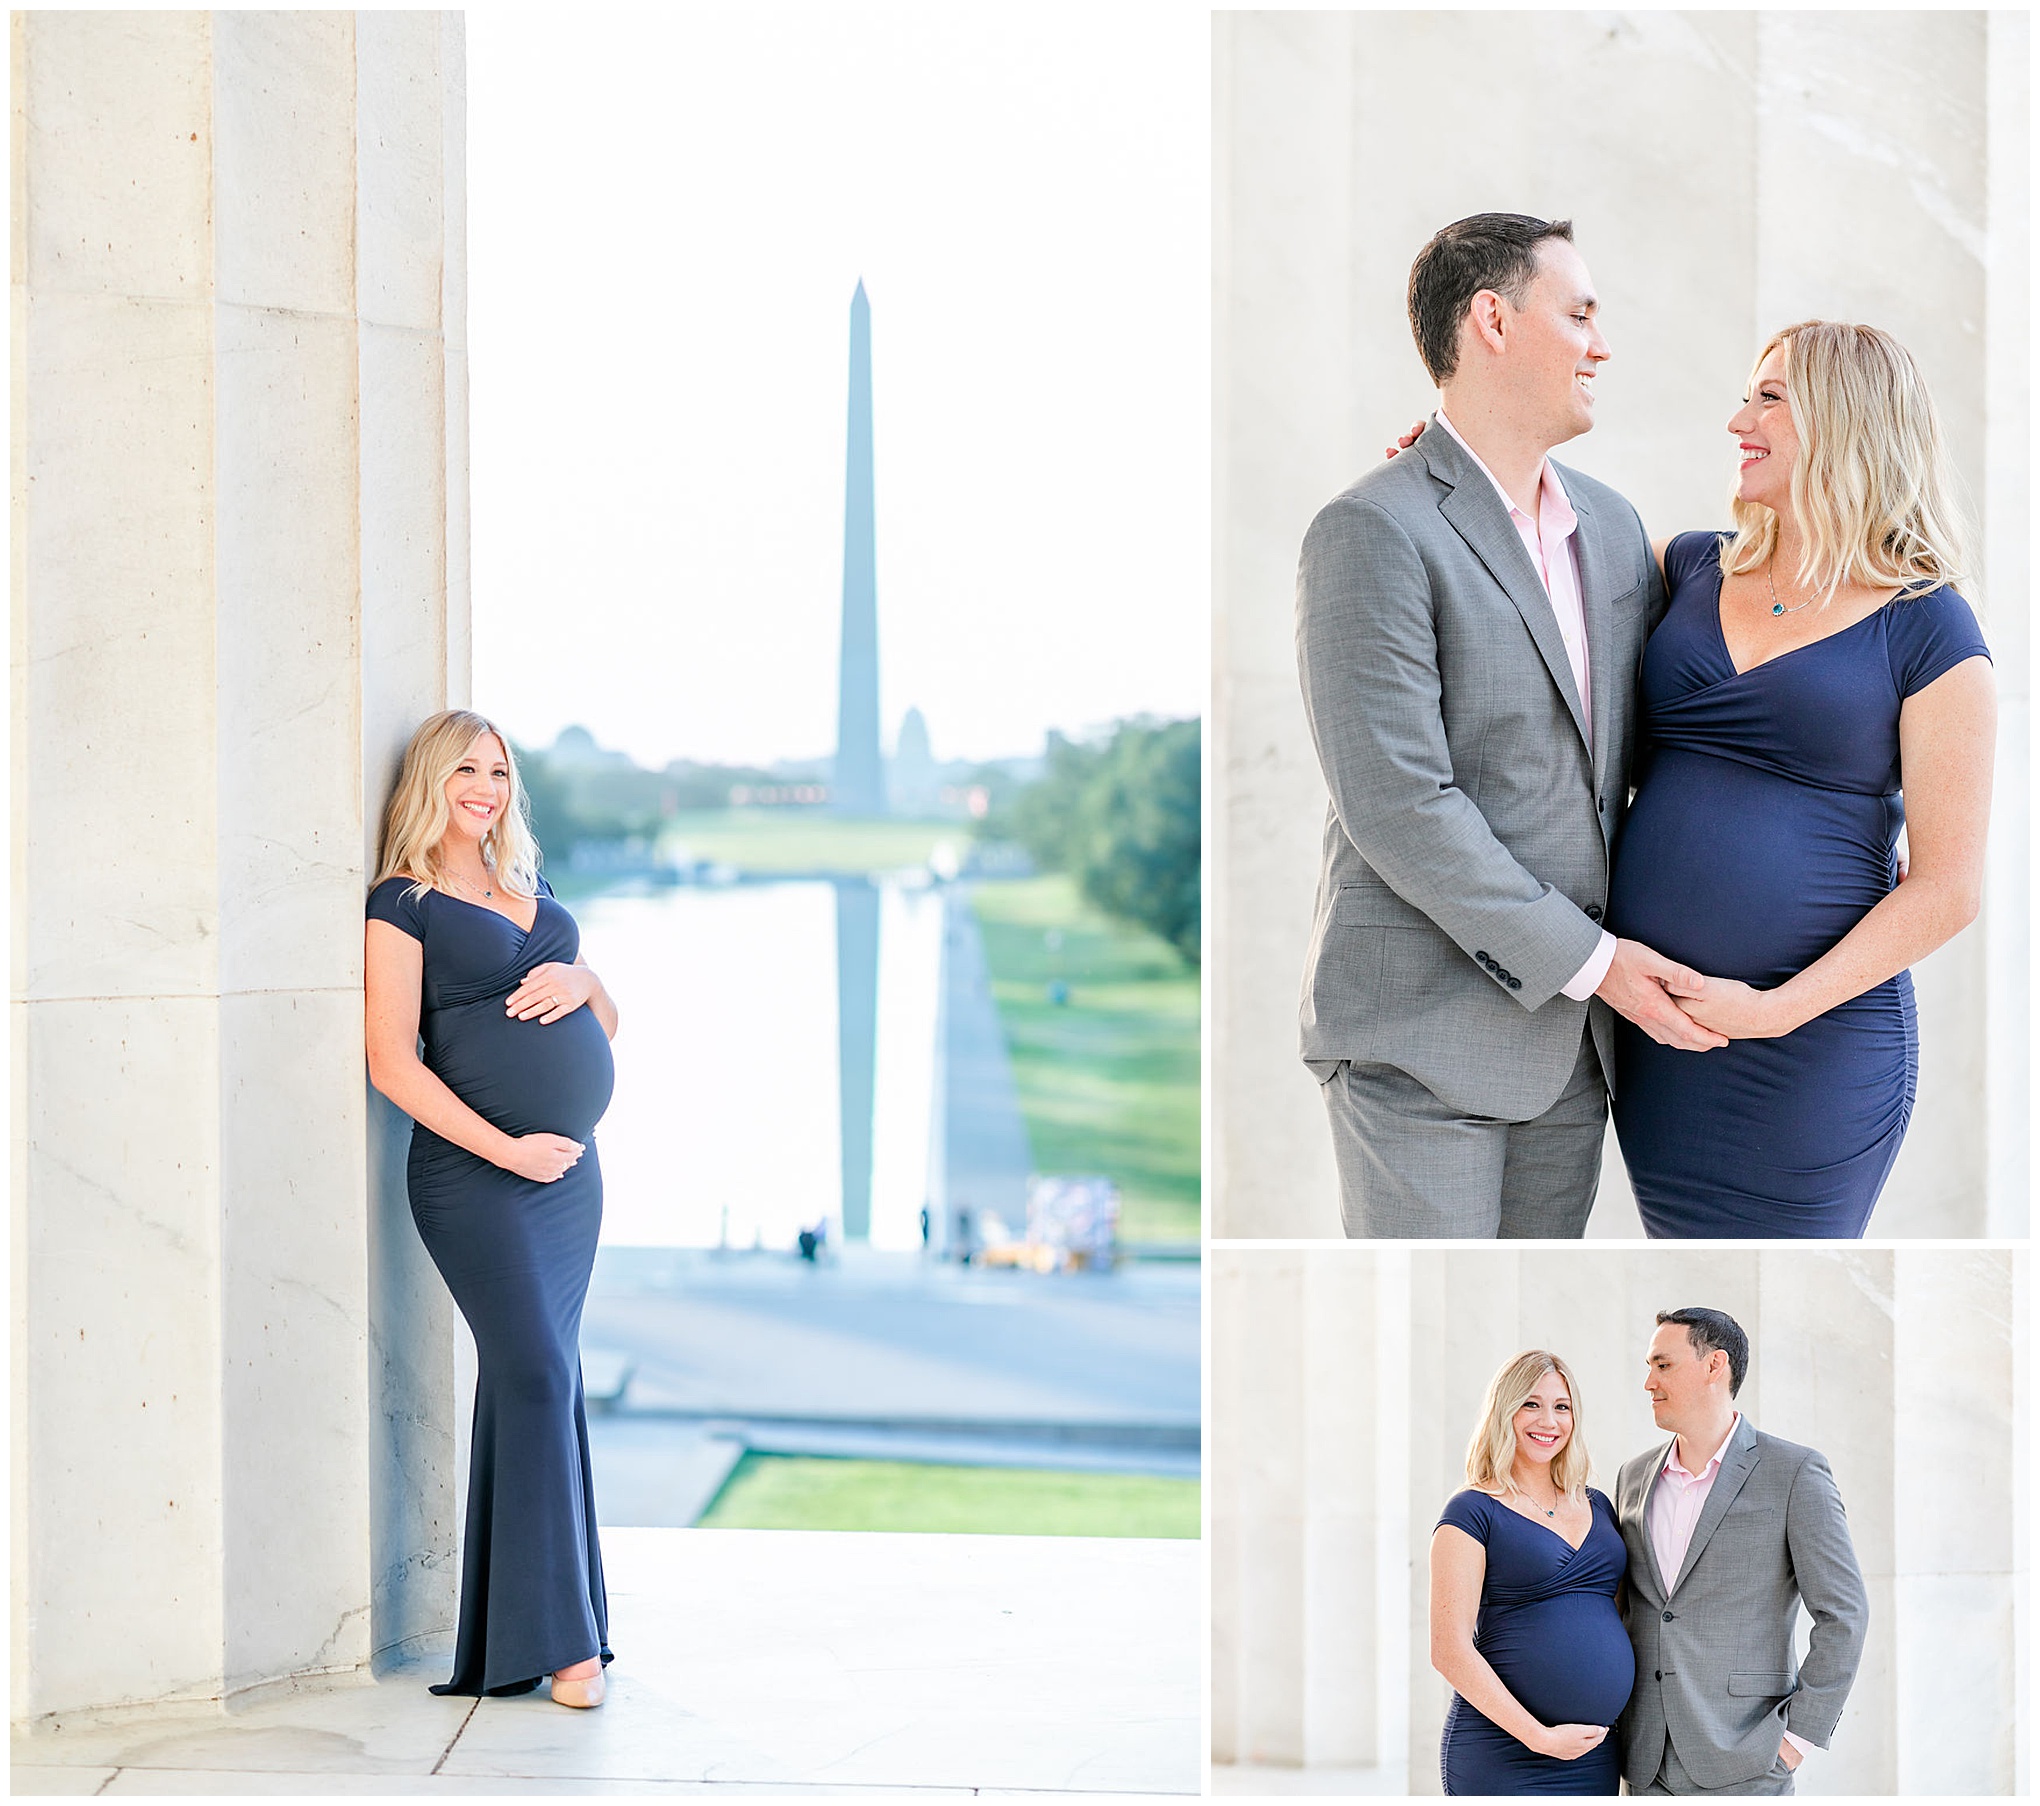 National Mall maternity photos, Lincoln Memorial maternity photos, Constitution Gardens maternity photos, DC maternity photos, DC maternity photographer, classic DC portraits, pregnant couple, natural light maternity photos, Rachel E.H. Photography, woman leaning against pillar, couple with arms around each other